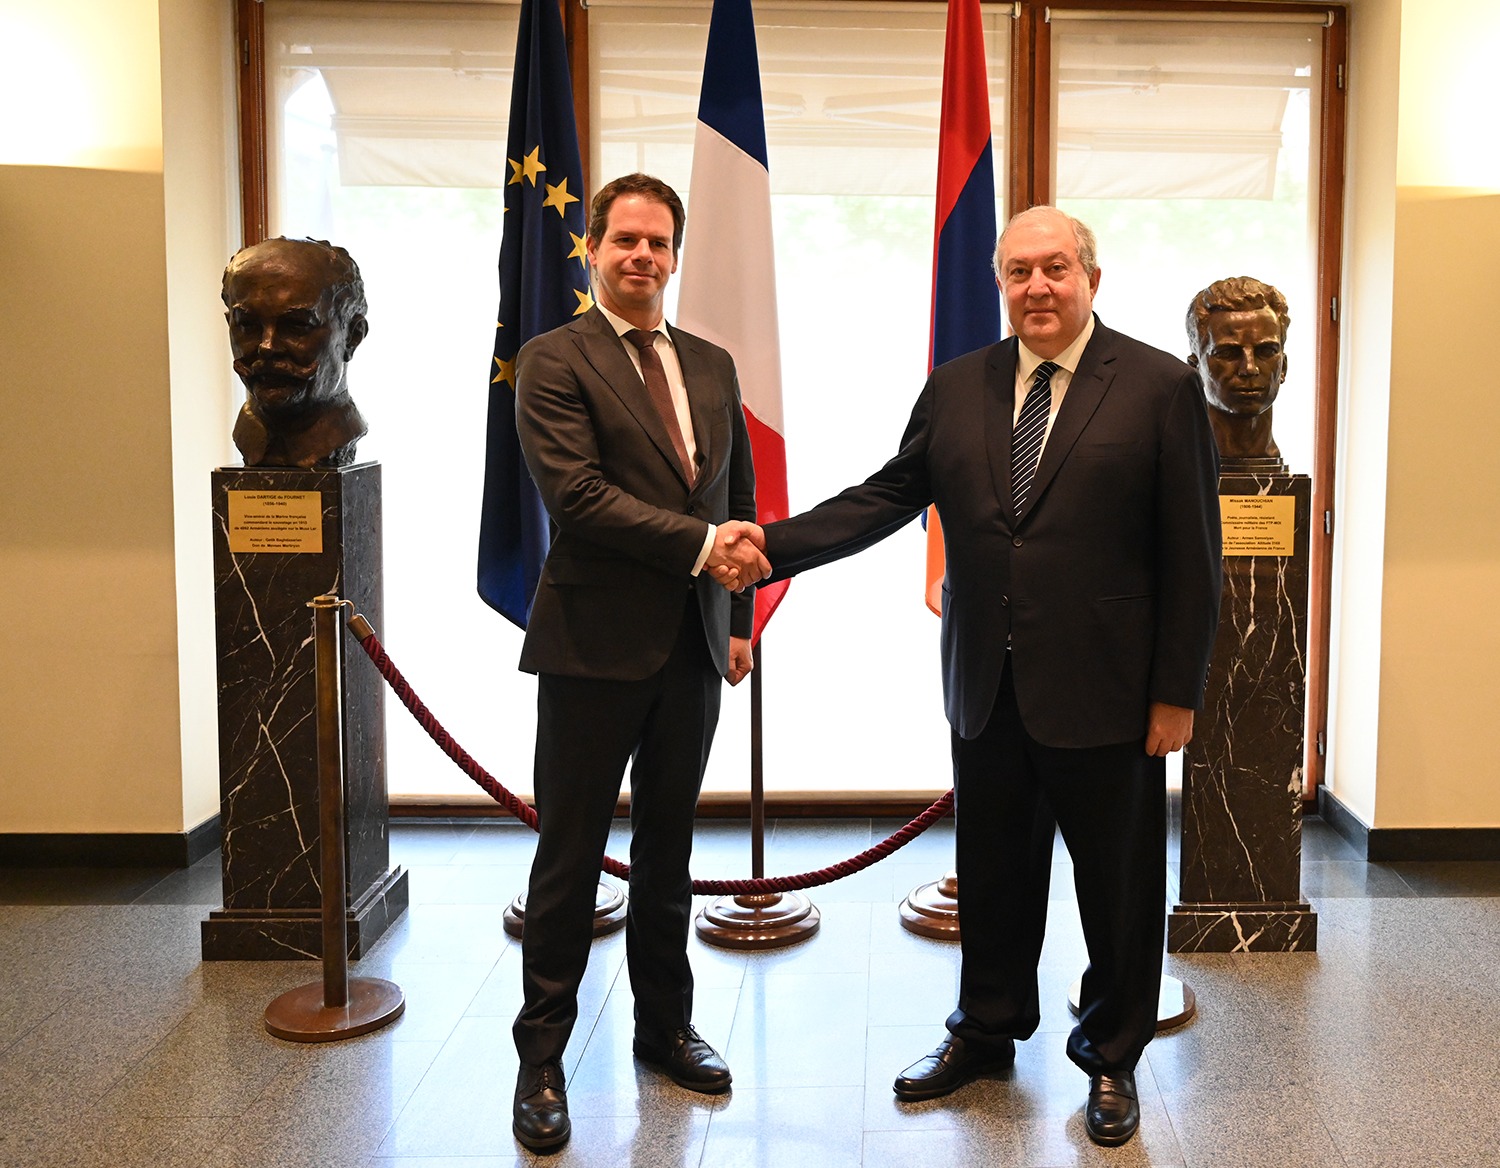 On the National Day of France, President Armen Sarkissian visited the French Embassy in Armenia